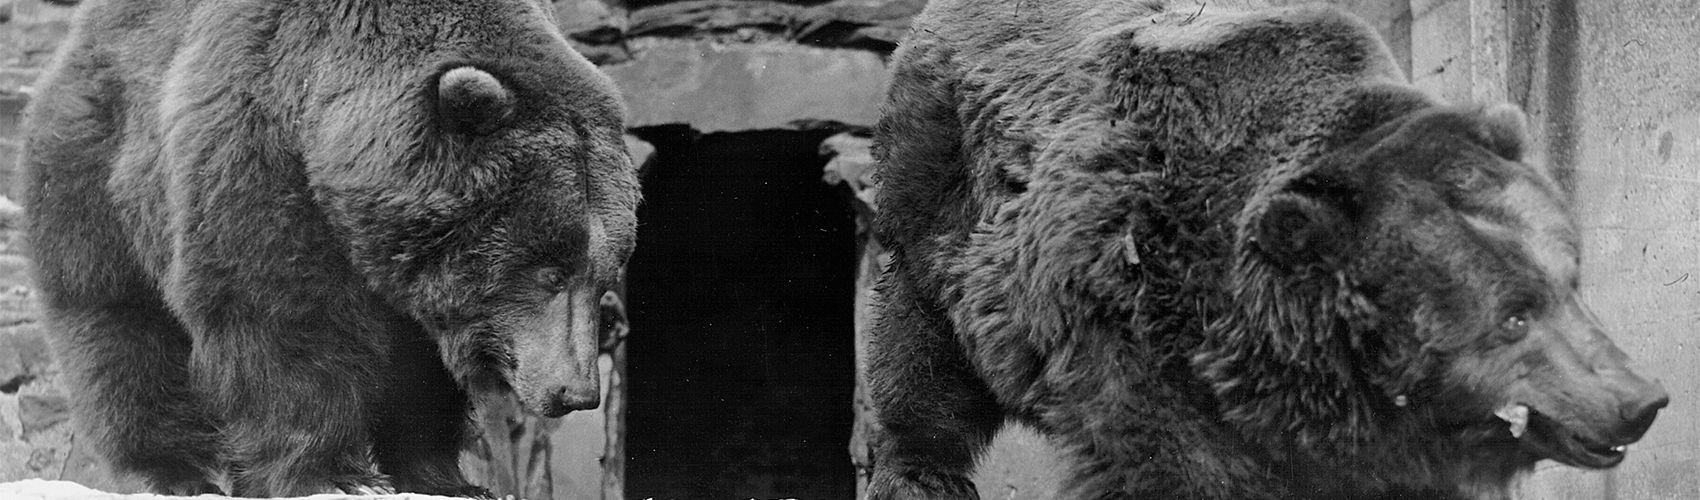 Brown bears at Akron Zoo in early 1900s